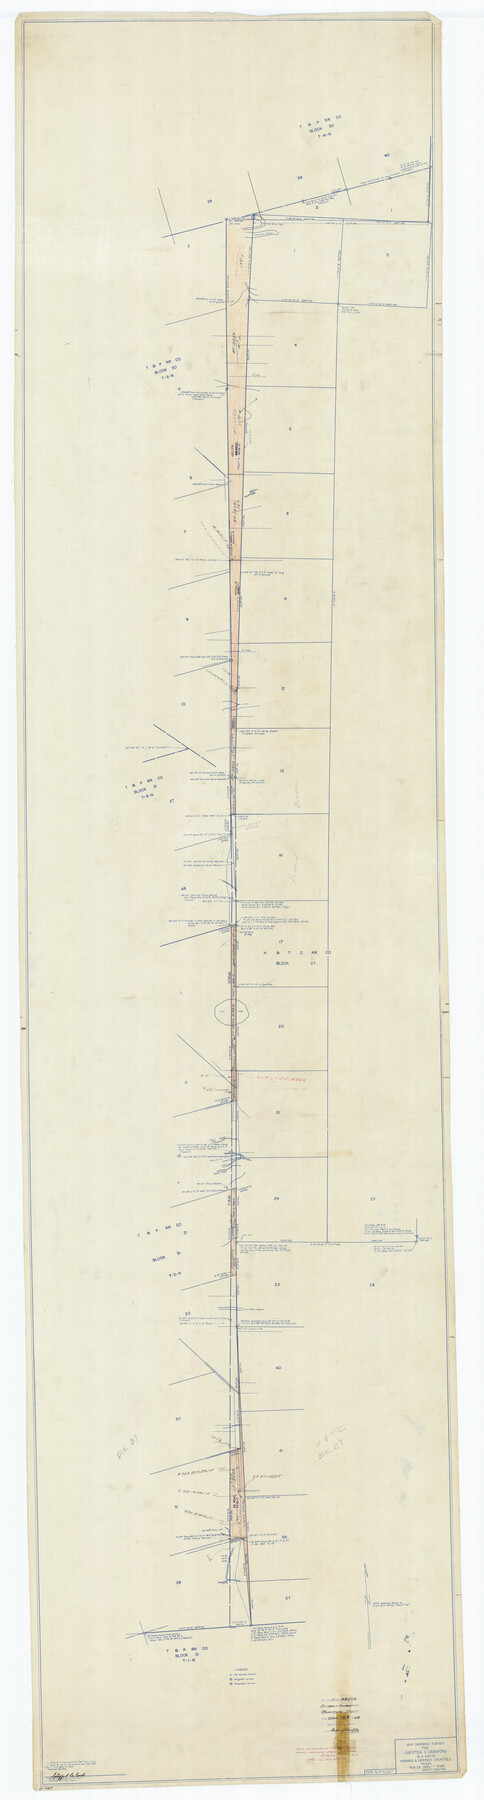 8449, Borden County Rolled Sketch 10, General Map Collection